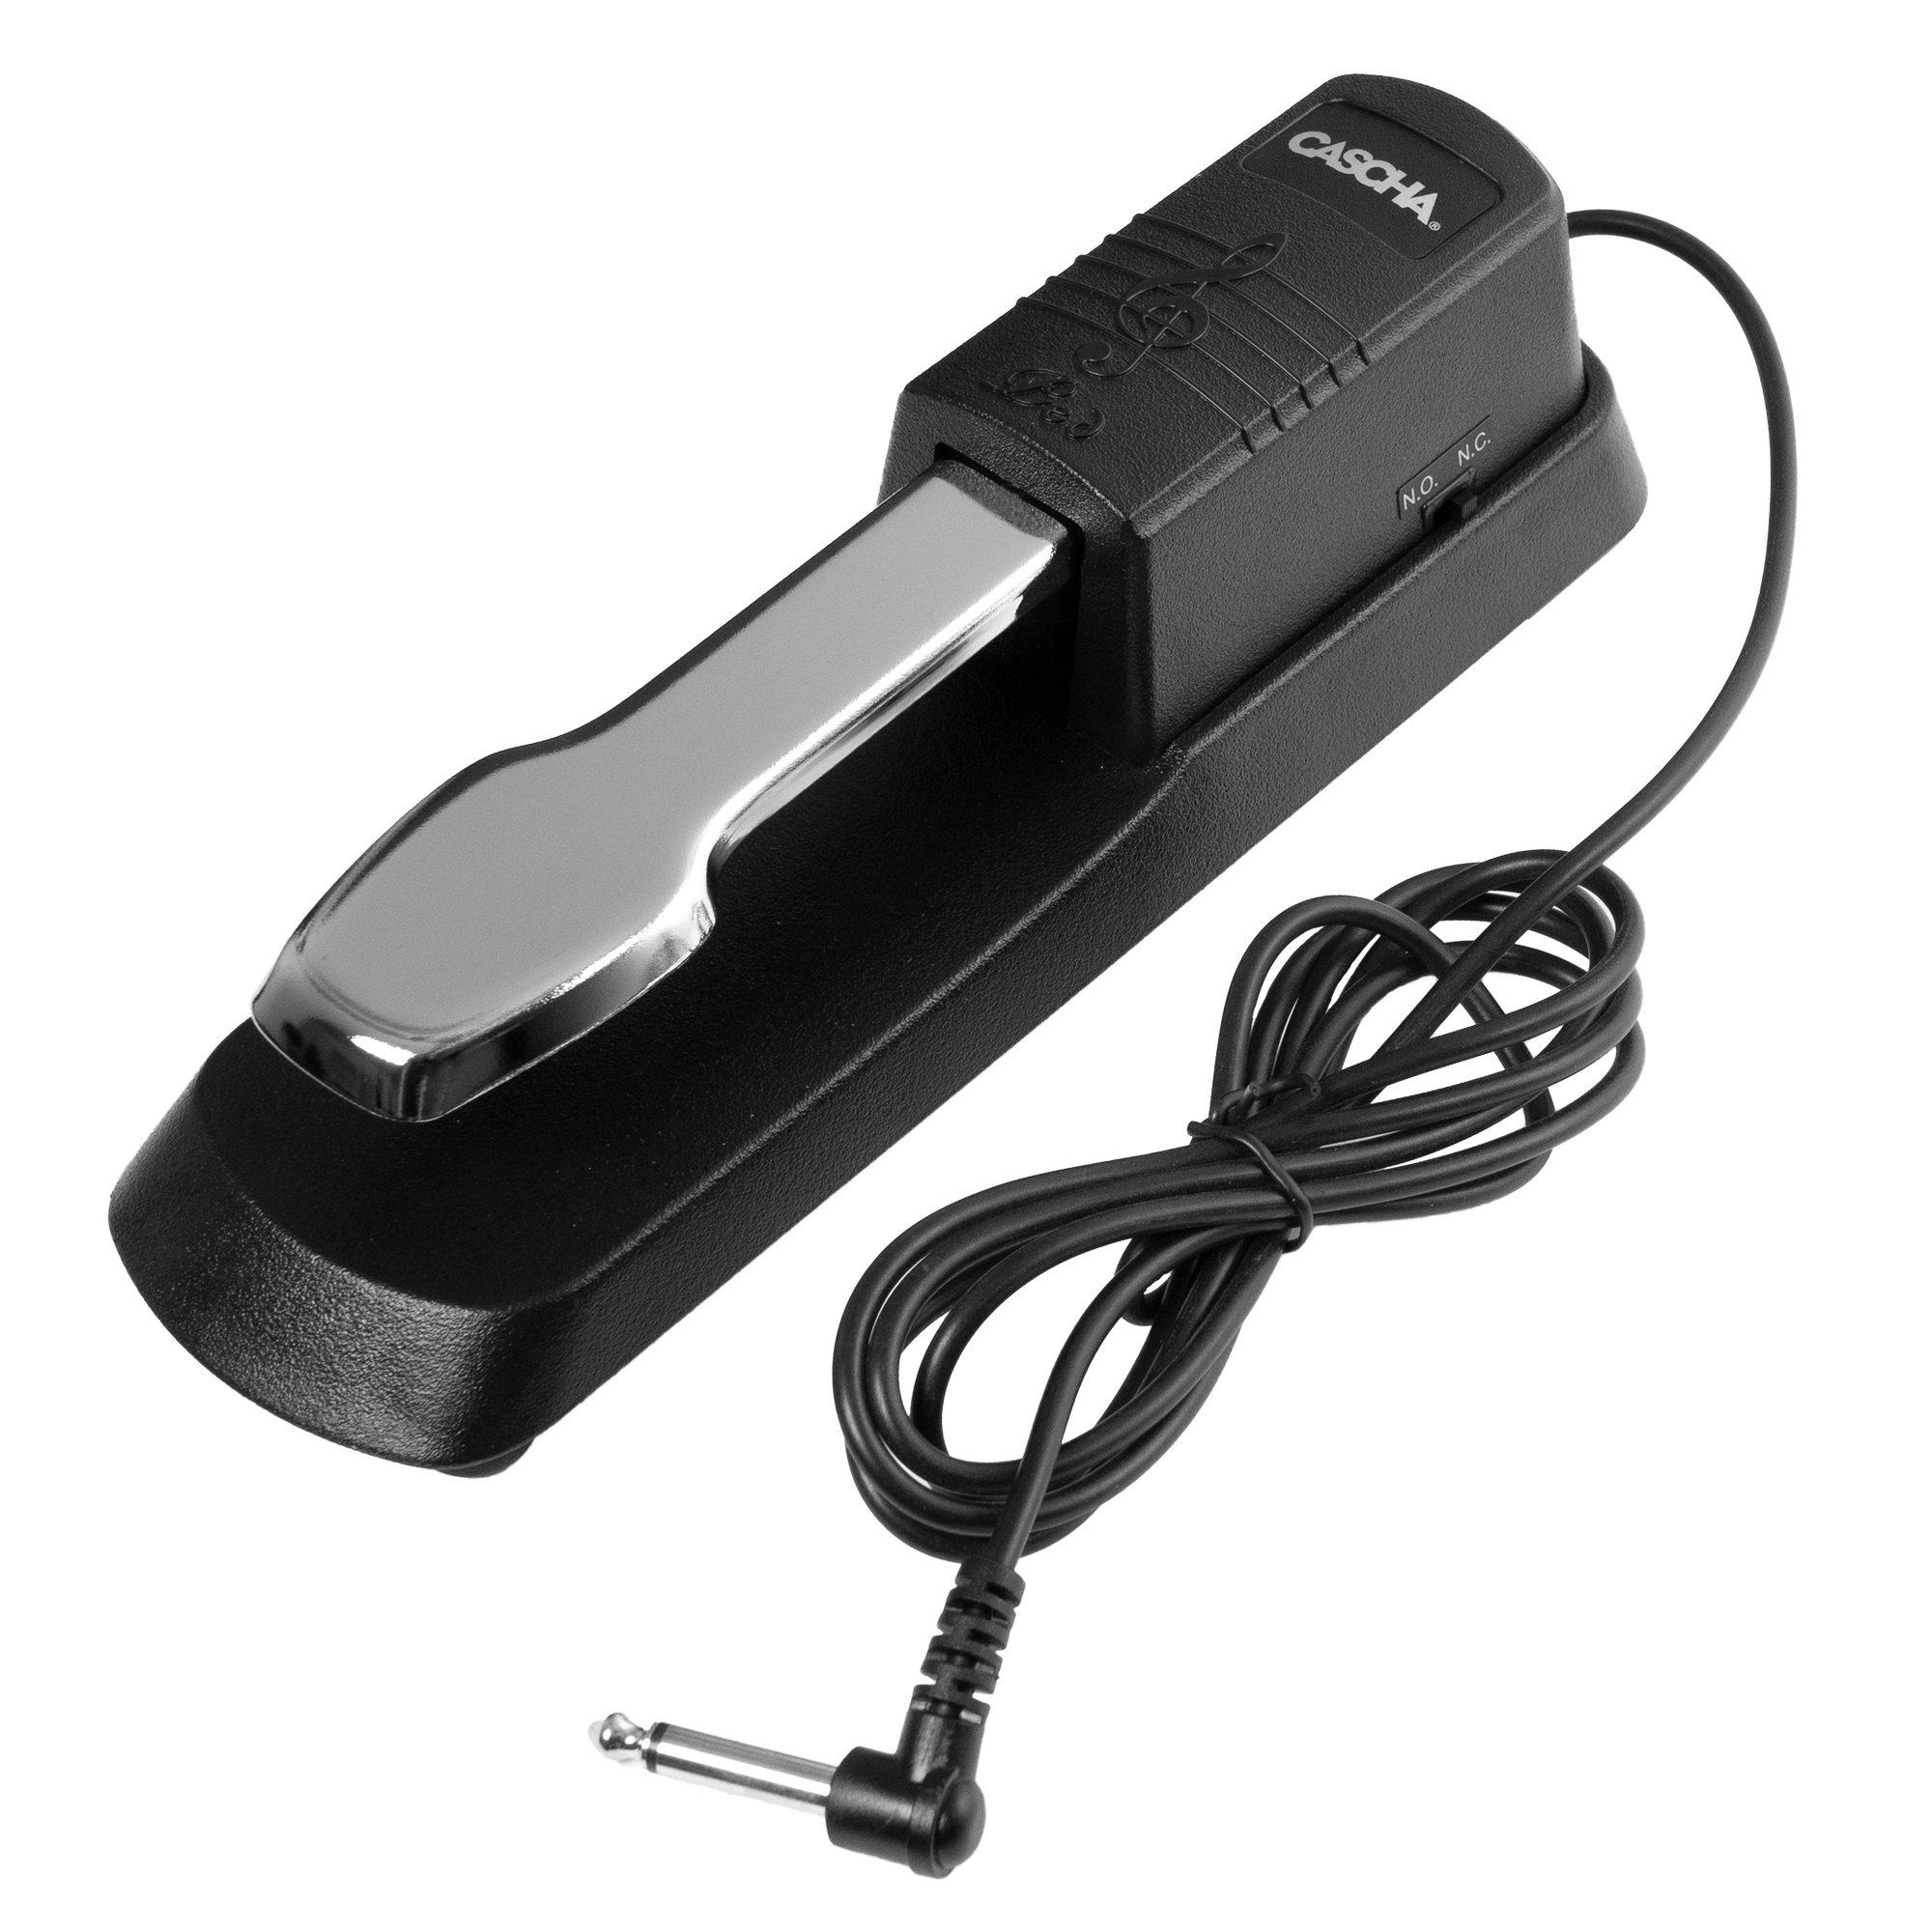 Sustain Pedal Product Photos 1